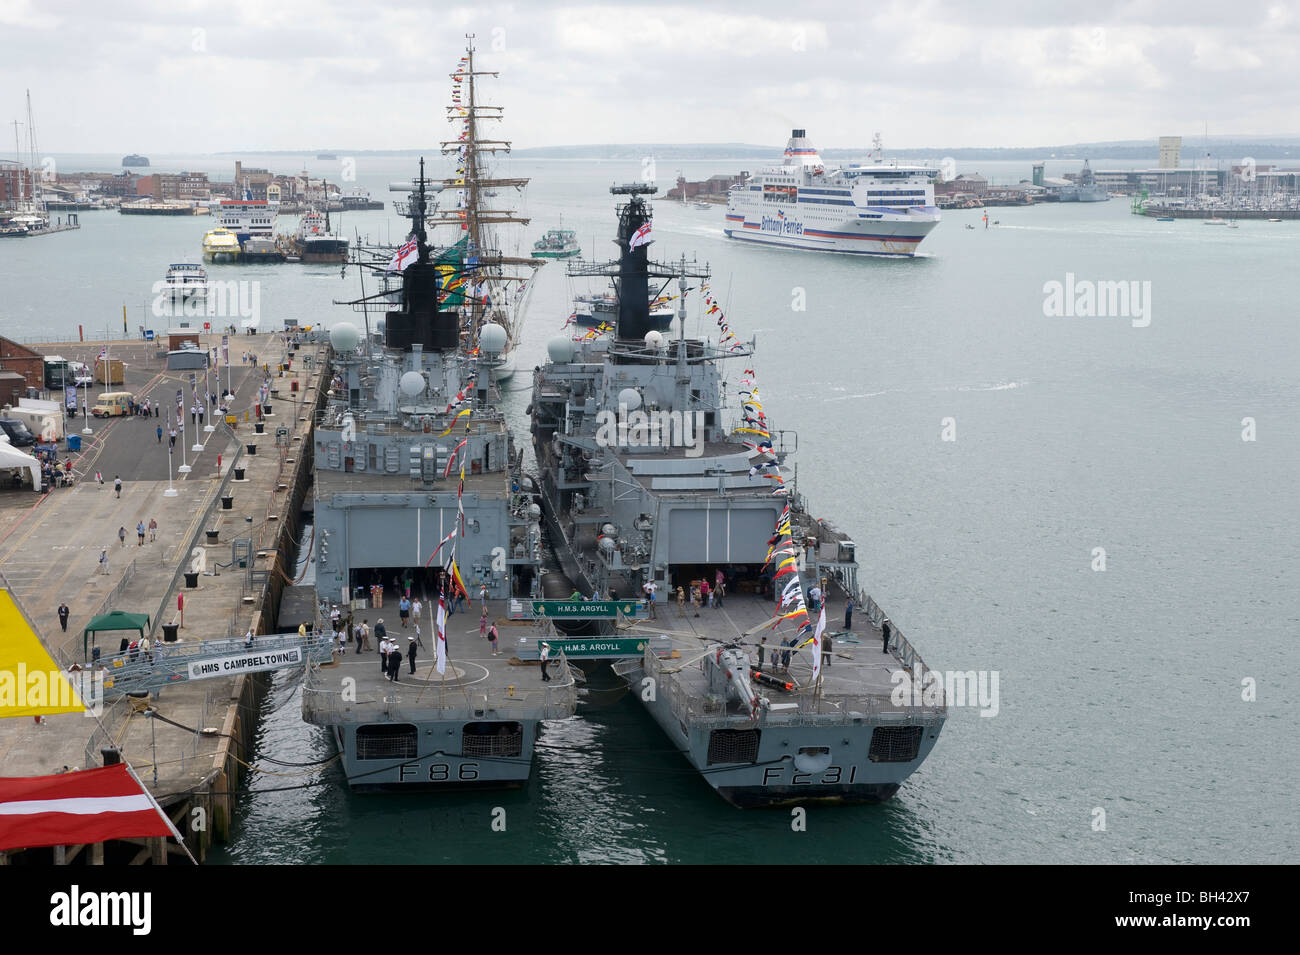 2 Royal Navy frigates moored in Portsmouth Dockyard during open day, Portsmouth harbour, Portsmouth, Hampshire, UK. Stock Photo